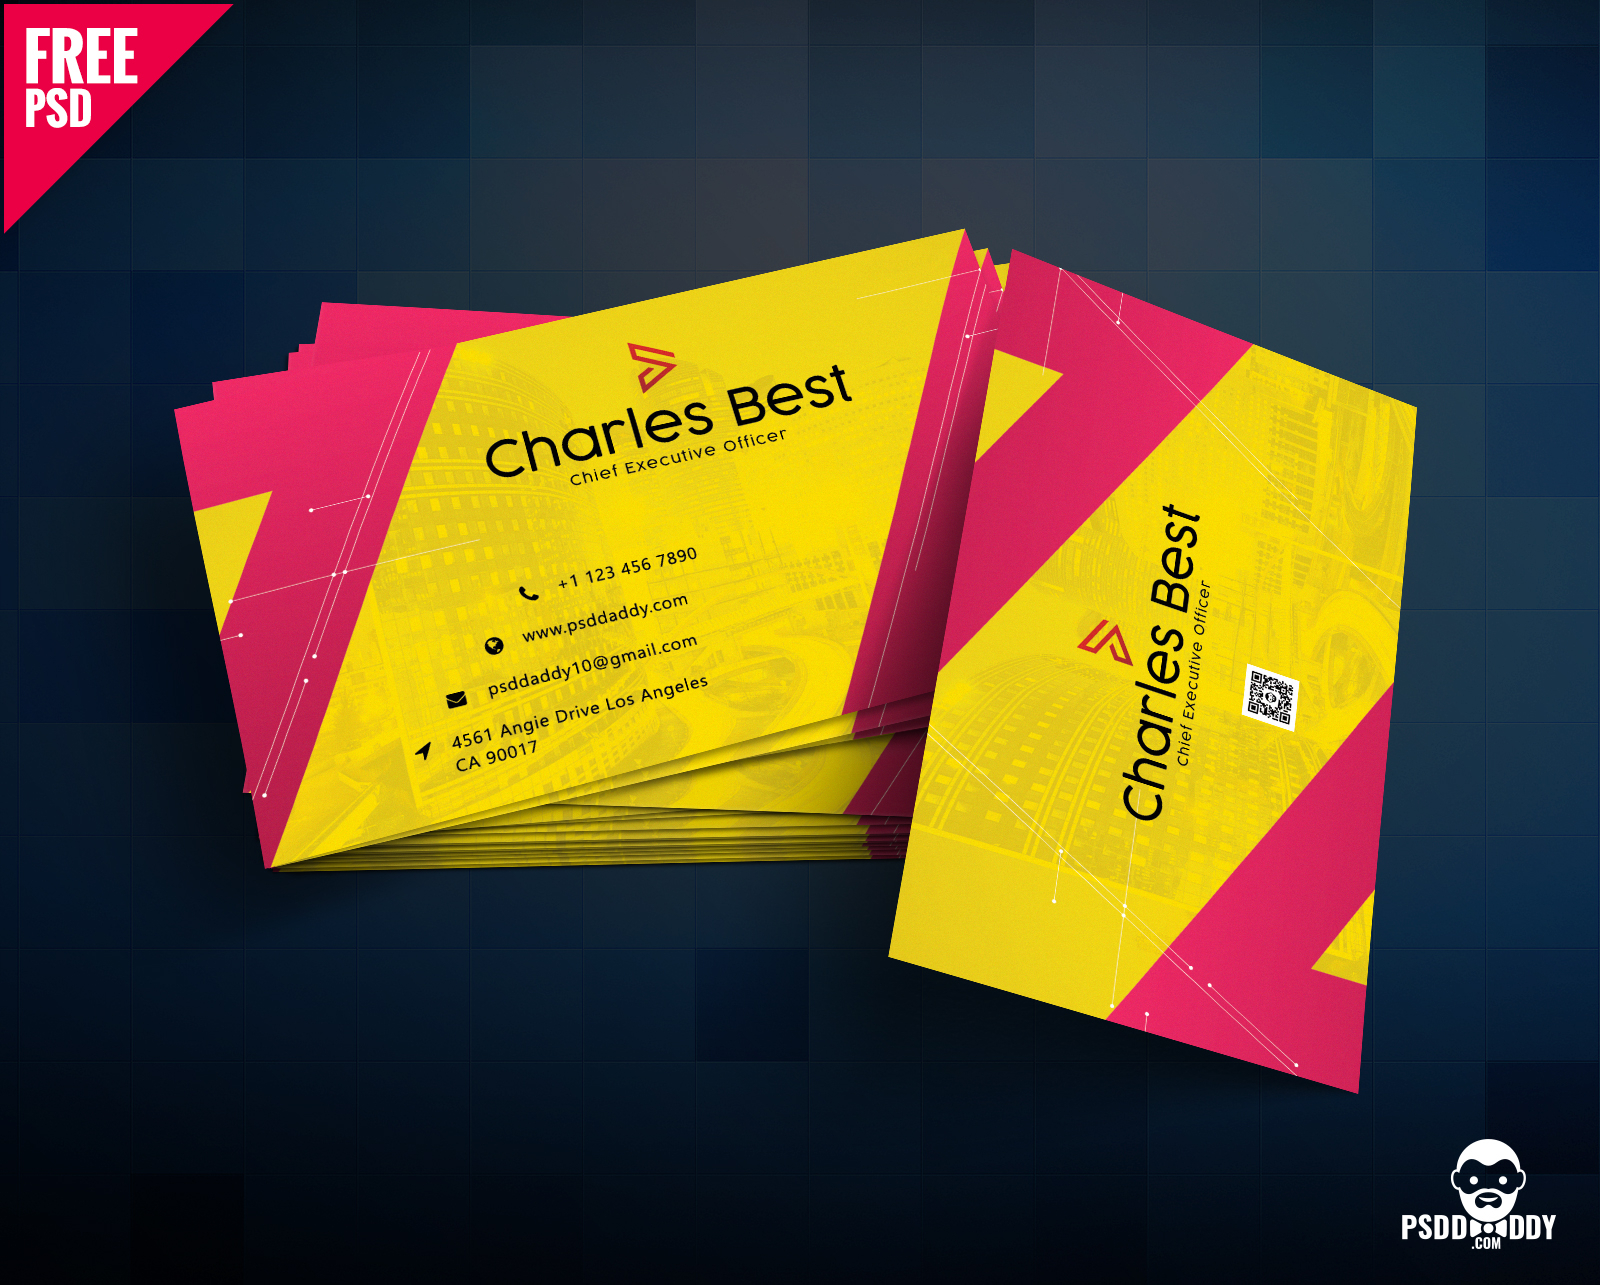 Download] Creative Business Card Free Psd | Psddaddy In Psd Name Card Template